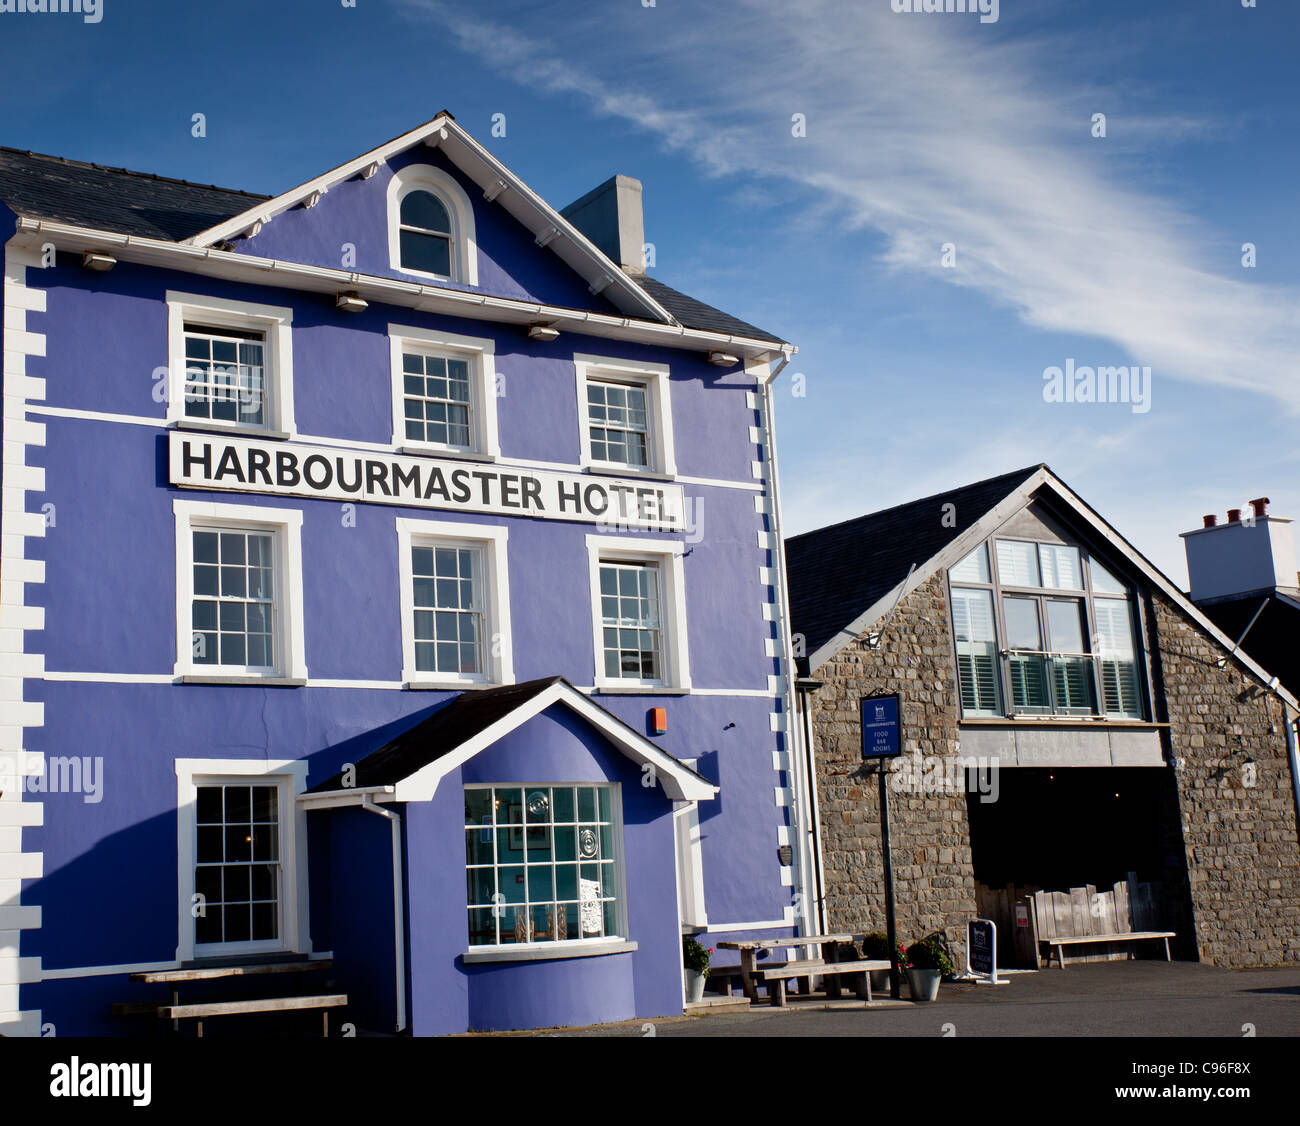 The Harbourmaster Hotel at Aberaeron, Ceredigion, Wales Stock Photo